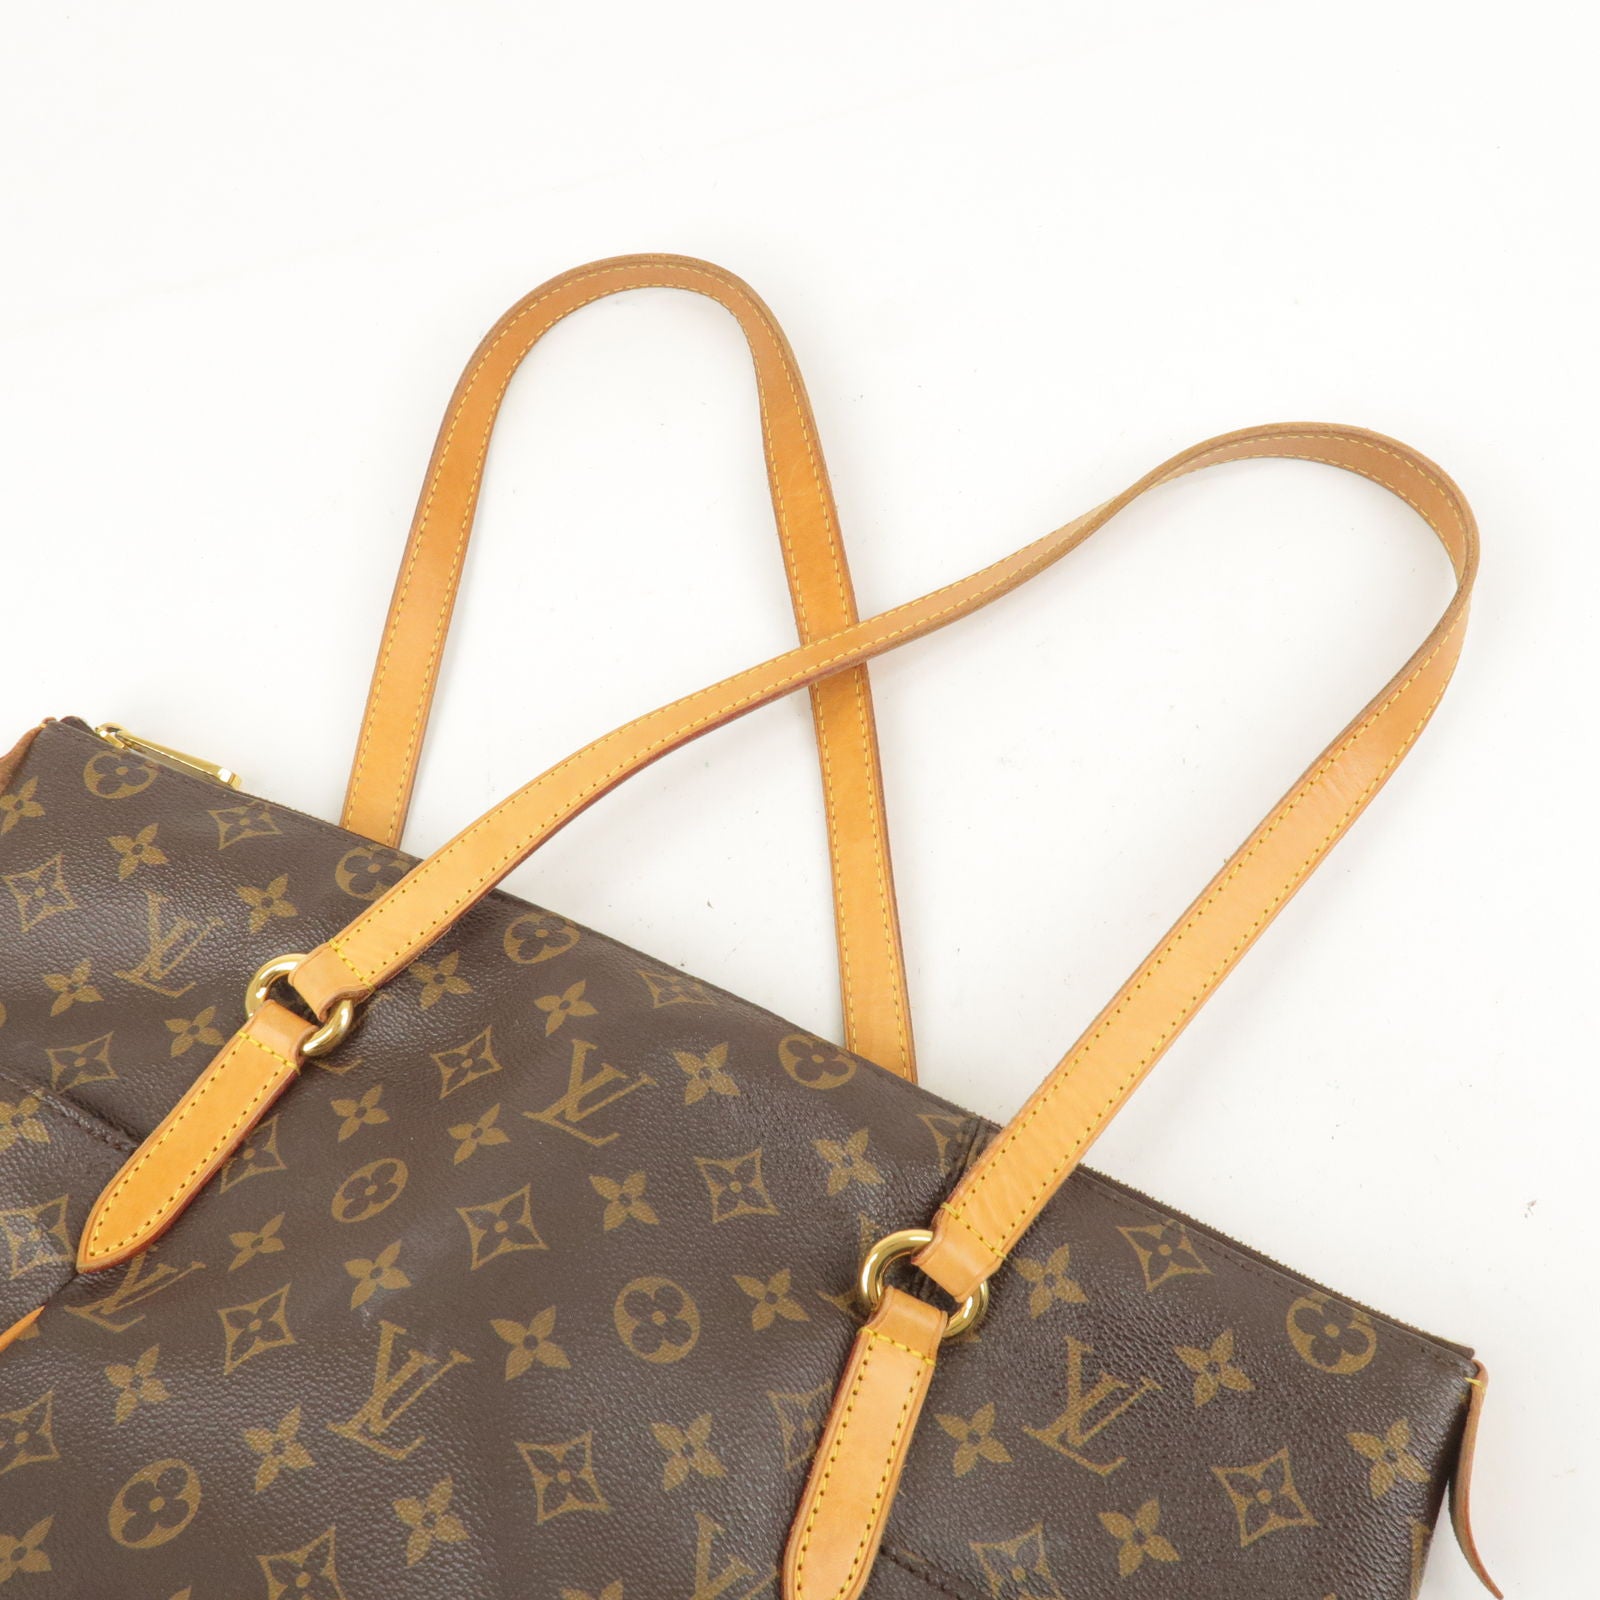 LOUIS VUITTON LV Totally MM M56689 Discontinued Tote Bag Monogram Brown EX+